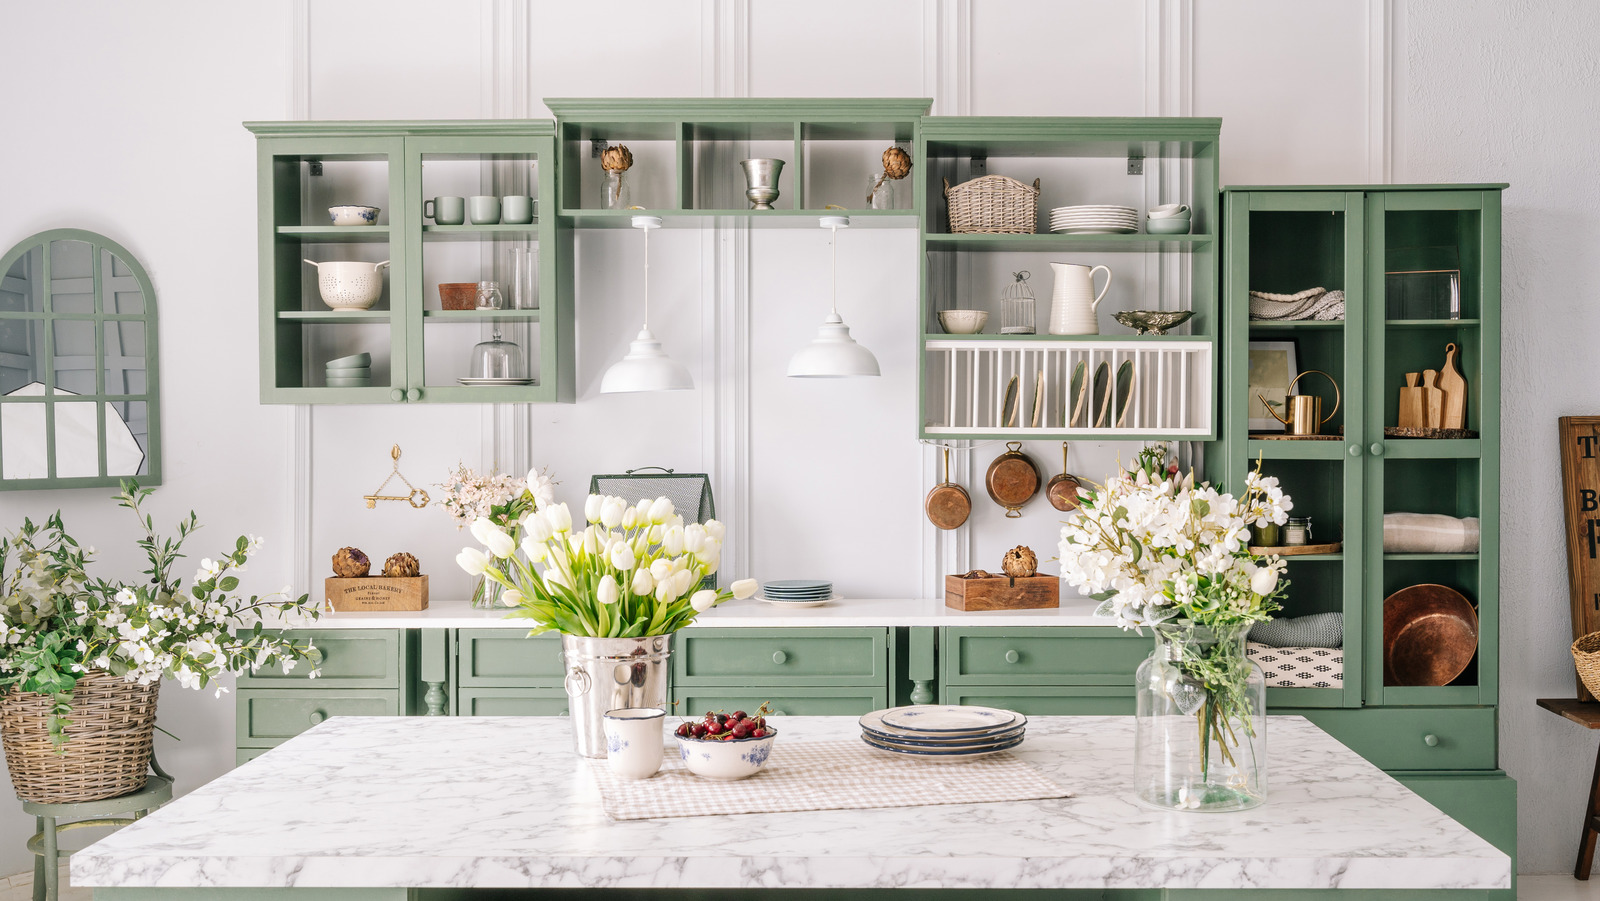 https://www.housedigest.com/img/gallery/an-expert-explains-the-best-way-to-organize-your-kitchen-cabinets/l-intro-1670956722.jpg